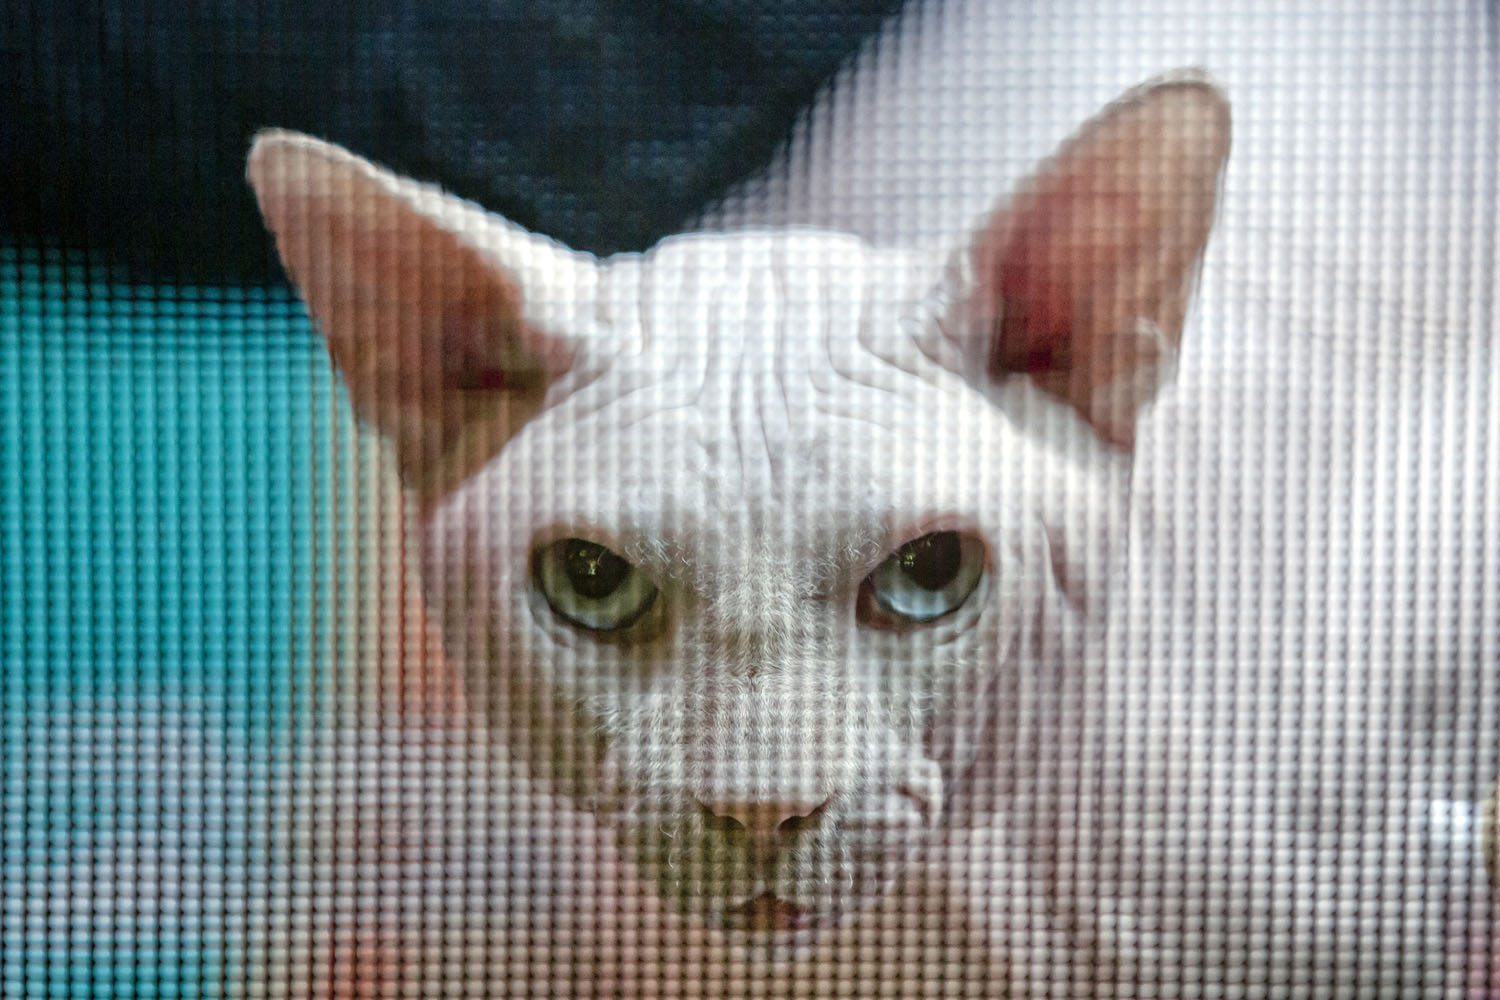 Sept. 28, 2013. A Sphynx cat stares from behind a protective mesh at an international feline beauty show Bucharest, Romania.